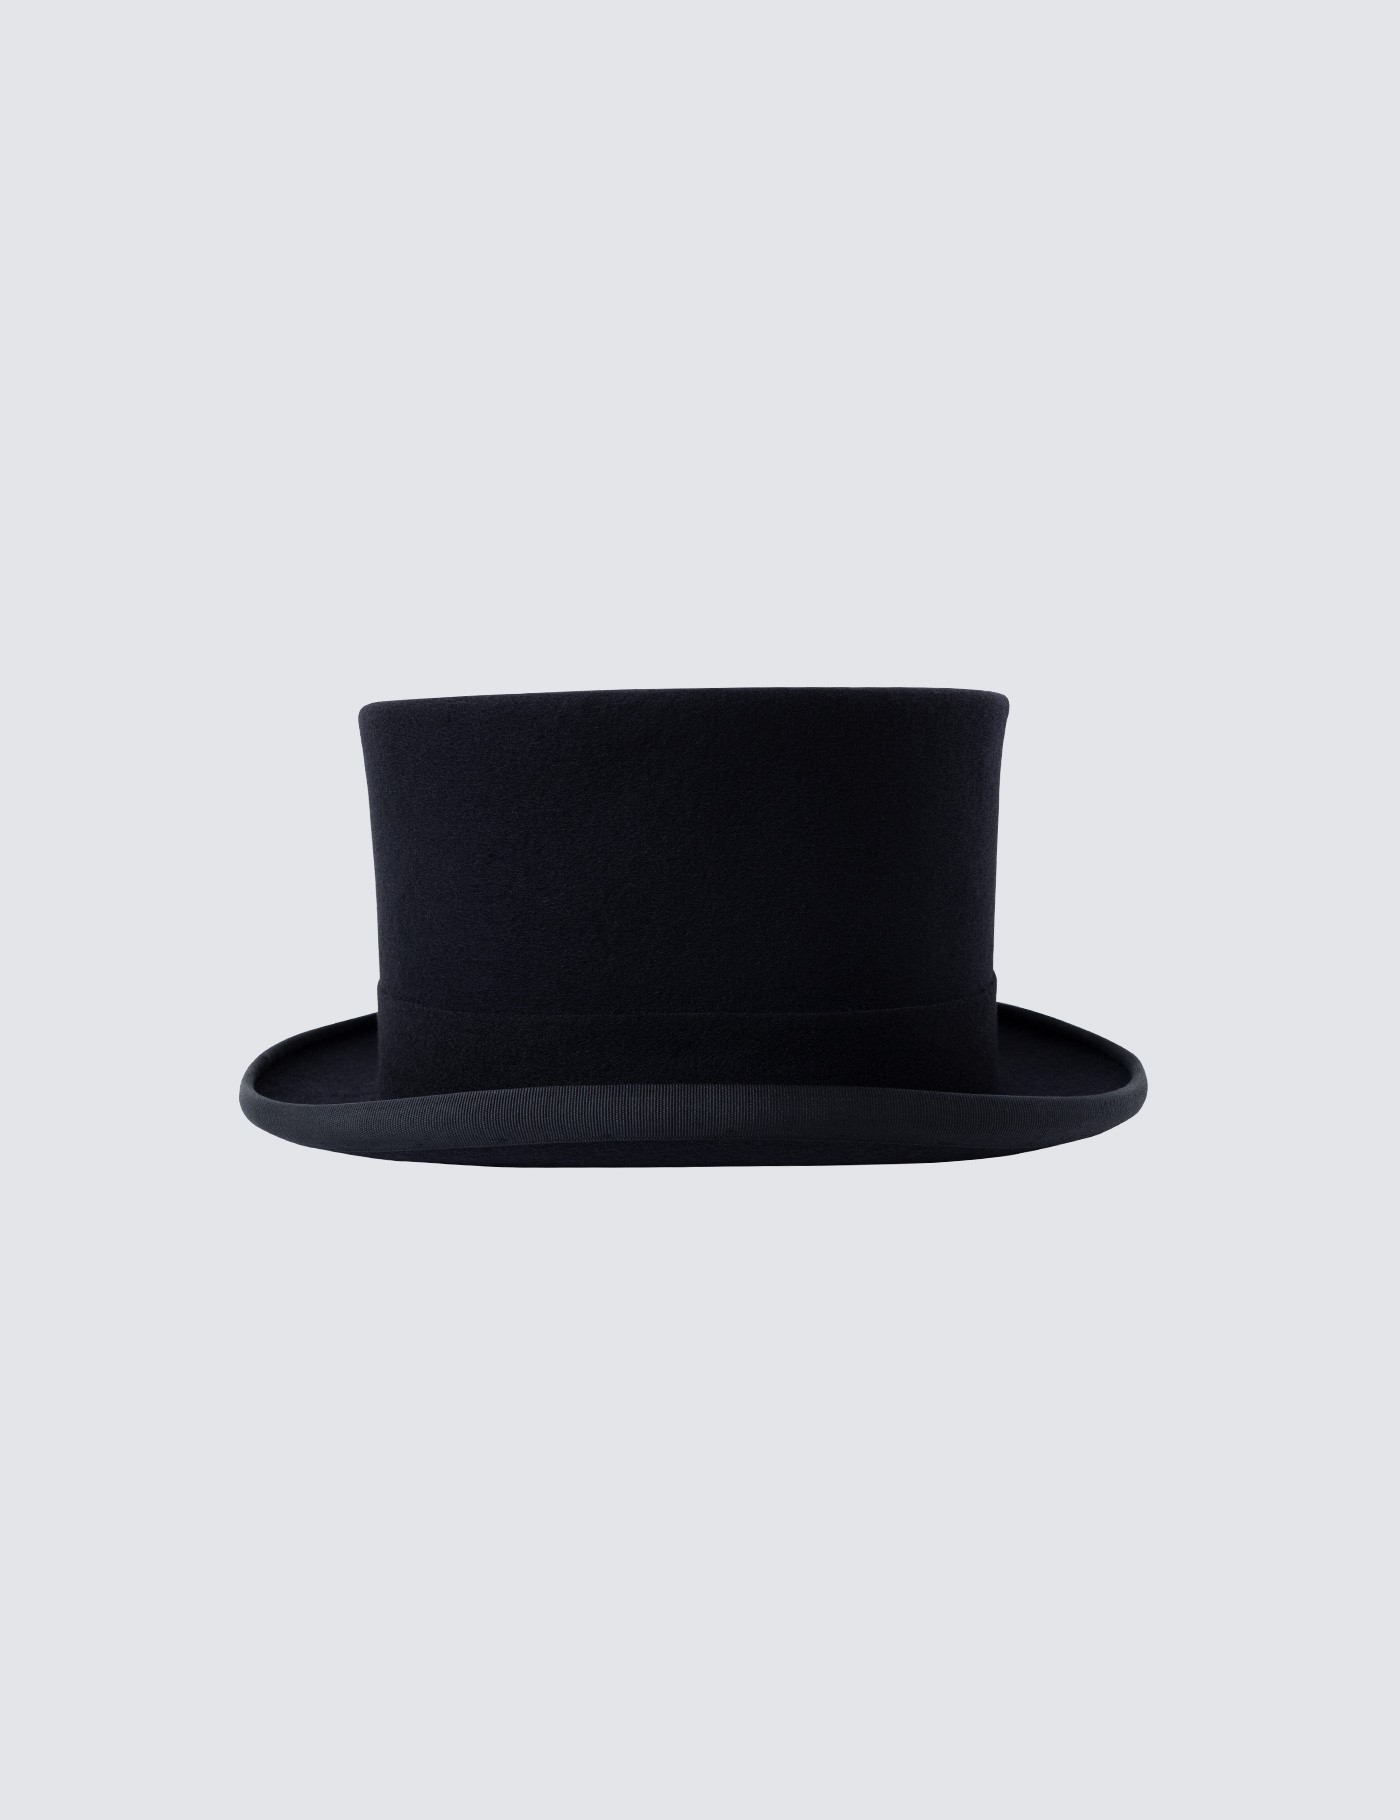 Christy’s Black Wool Felt Top Hat with White Lining